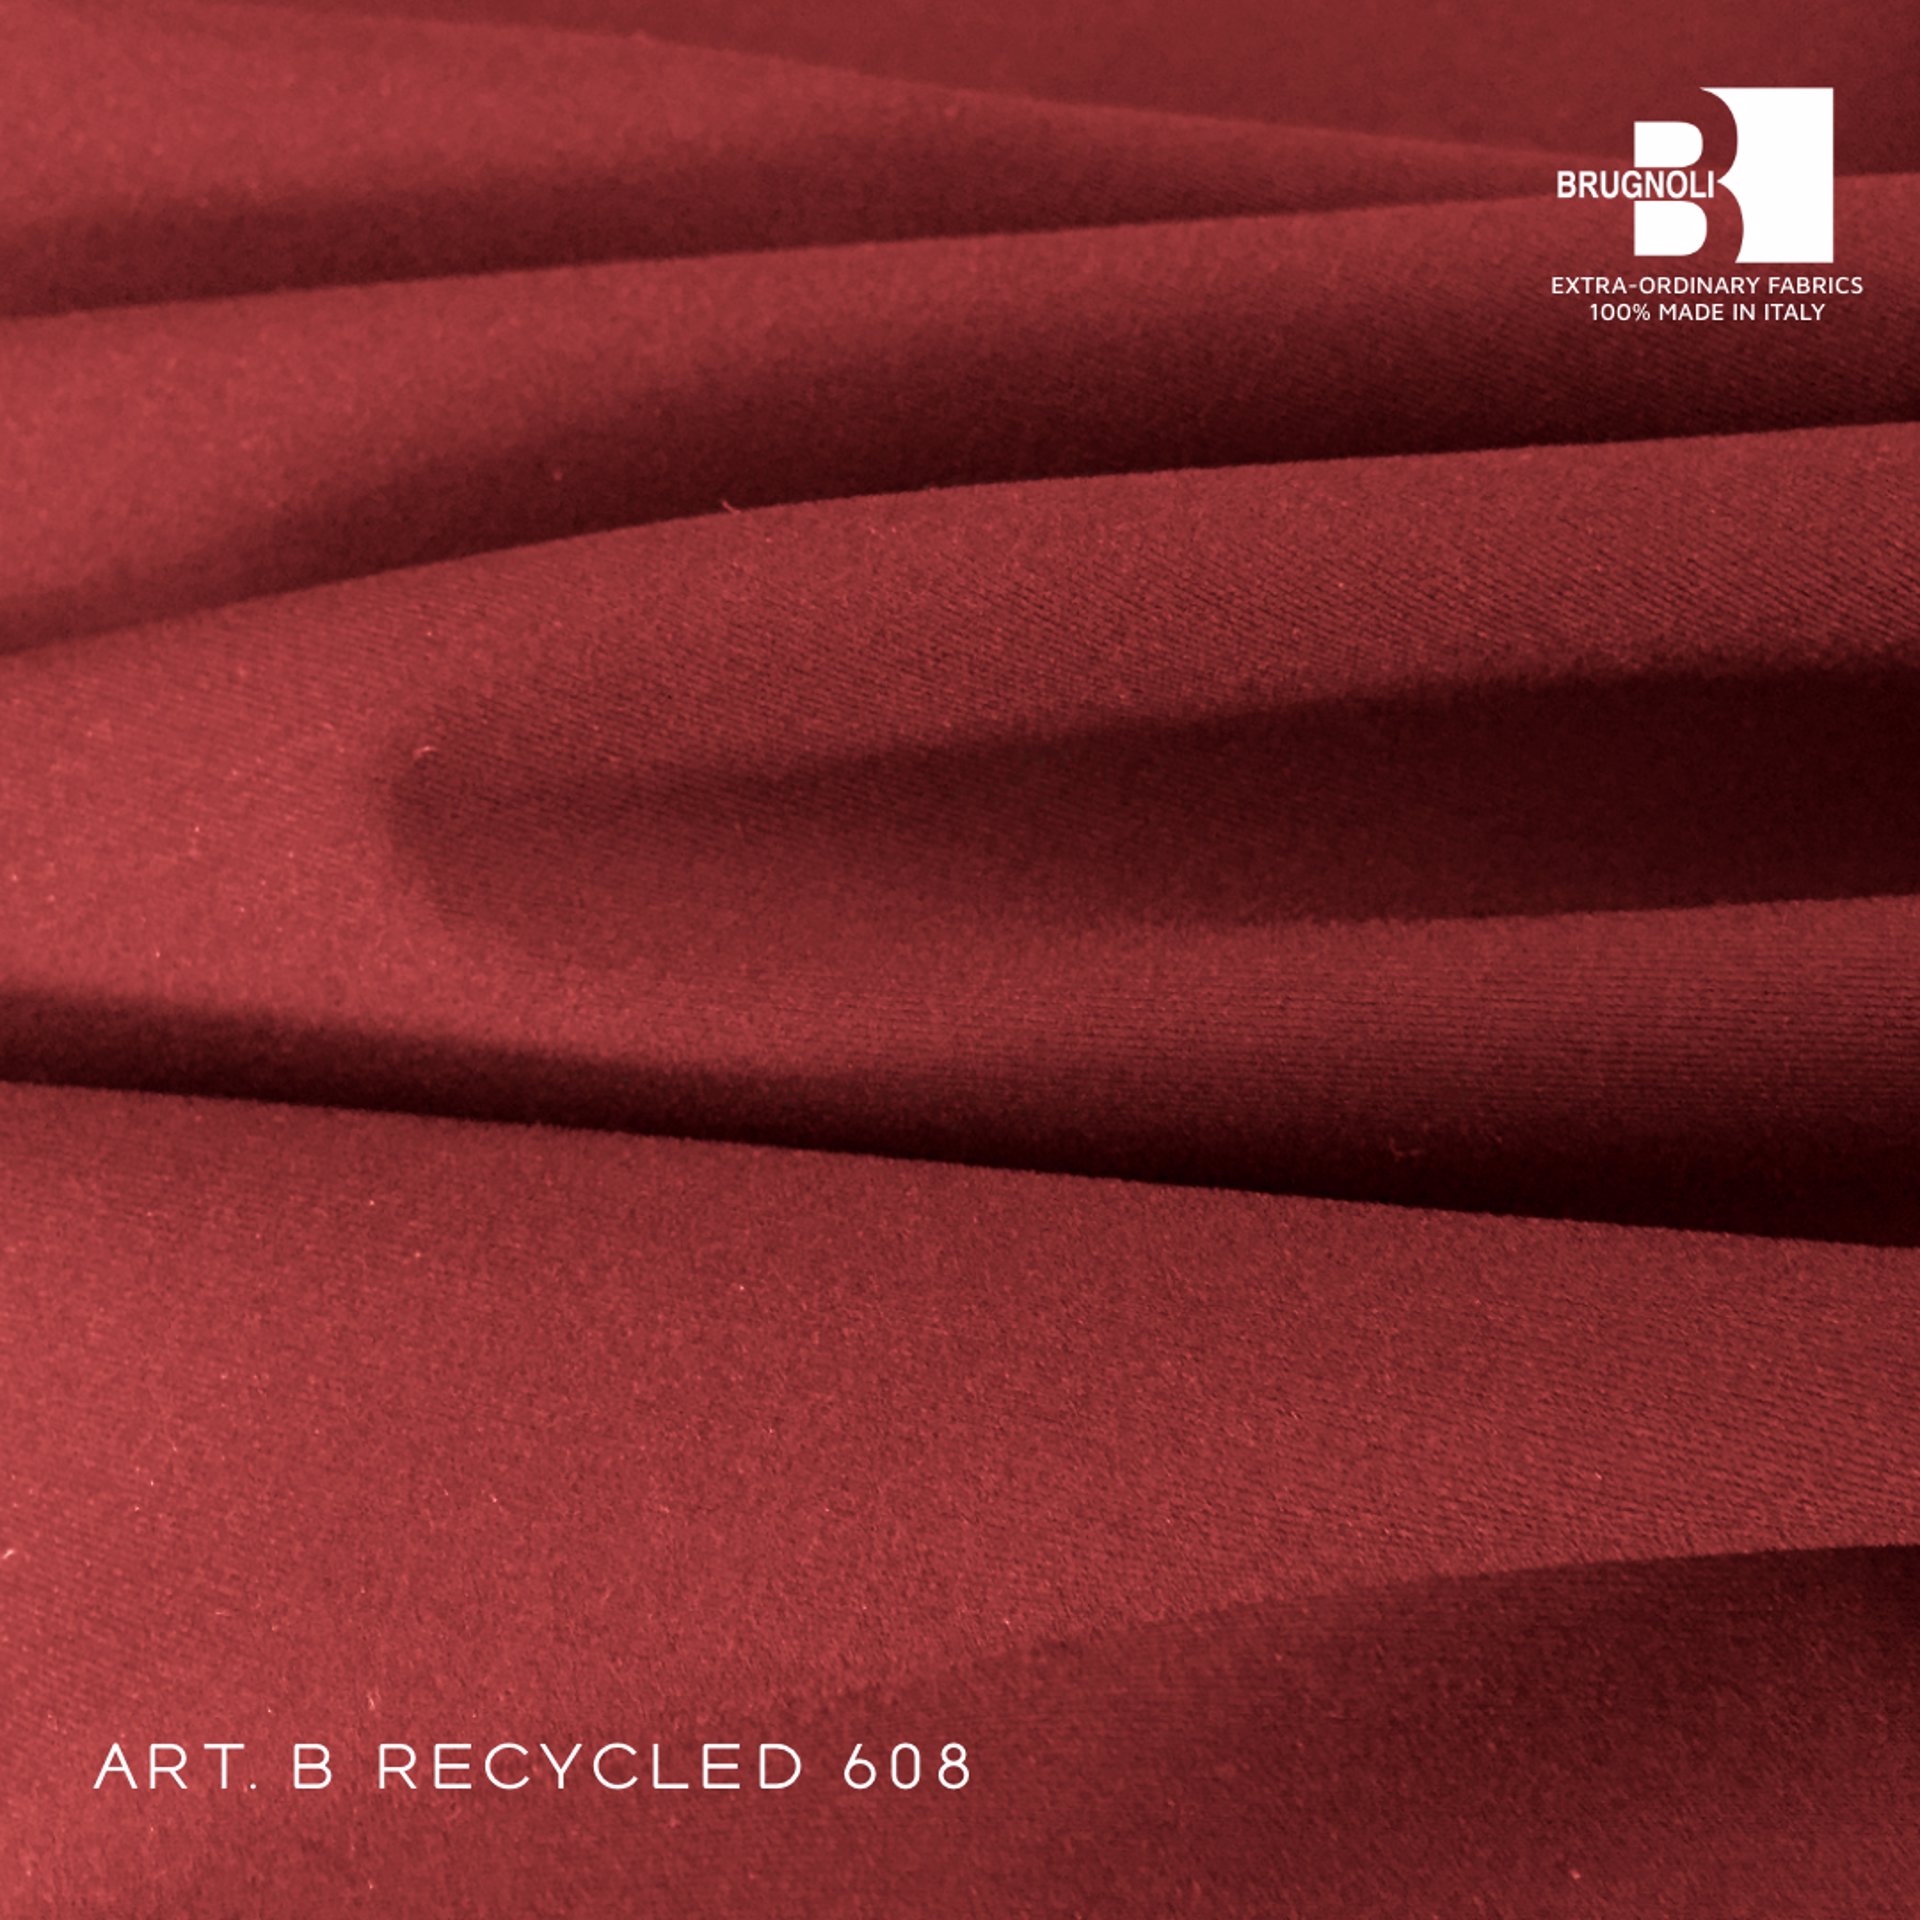 B RECYCLED 608